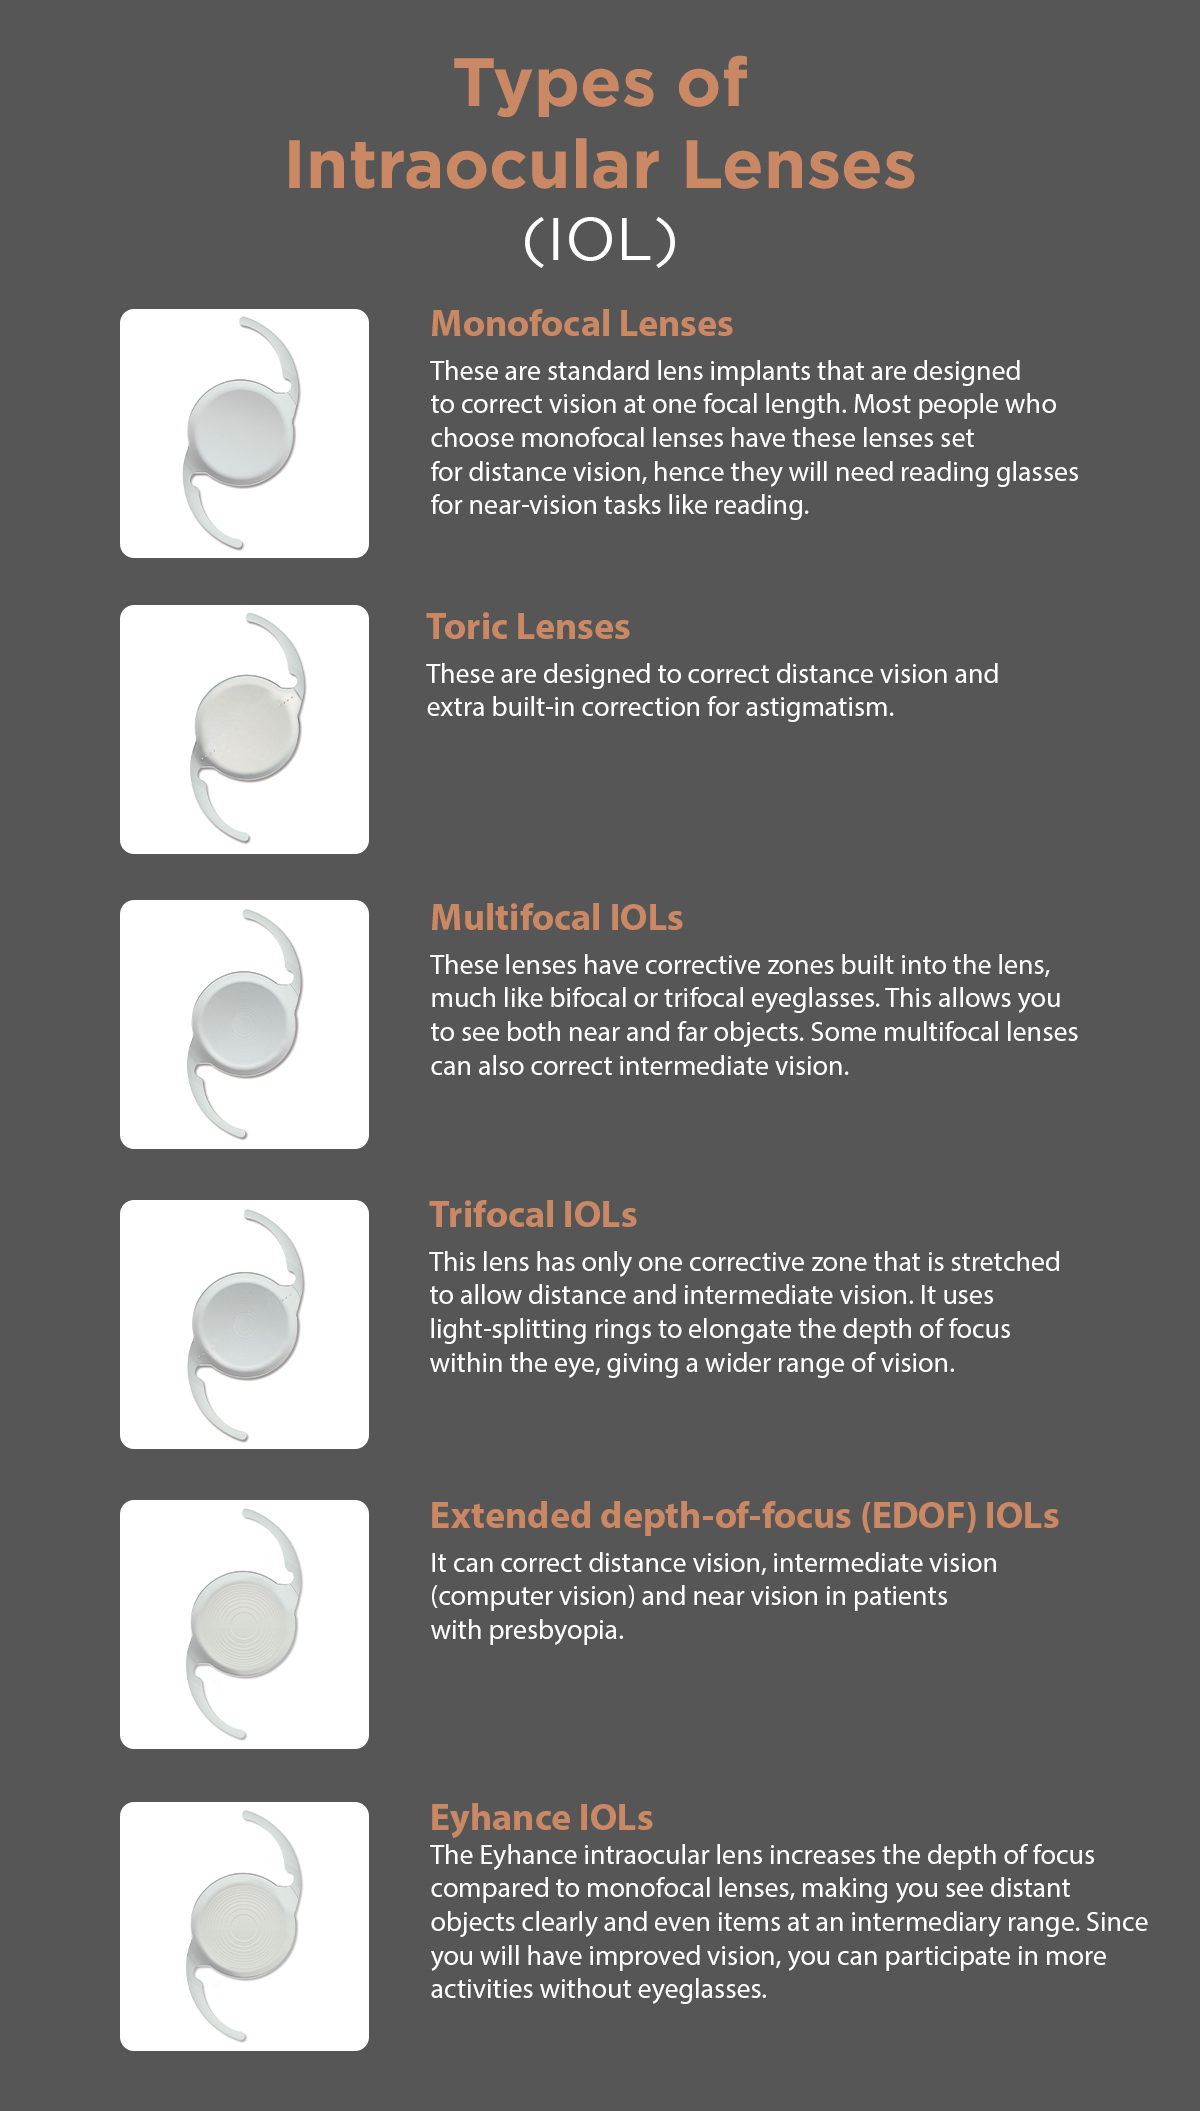 Types of intraocular lenses